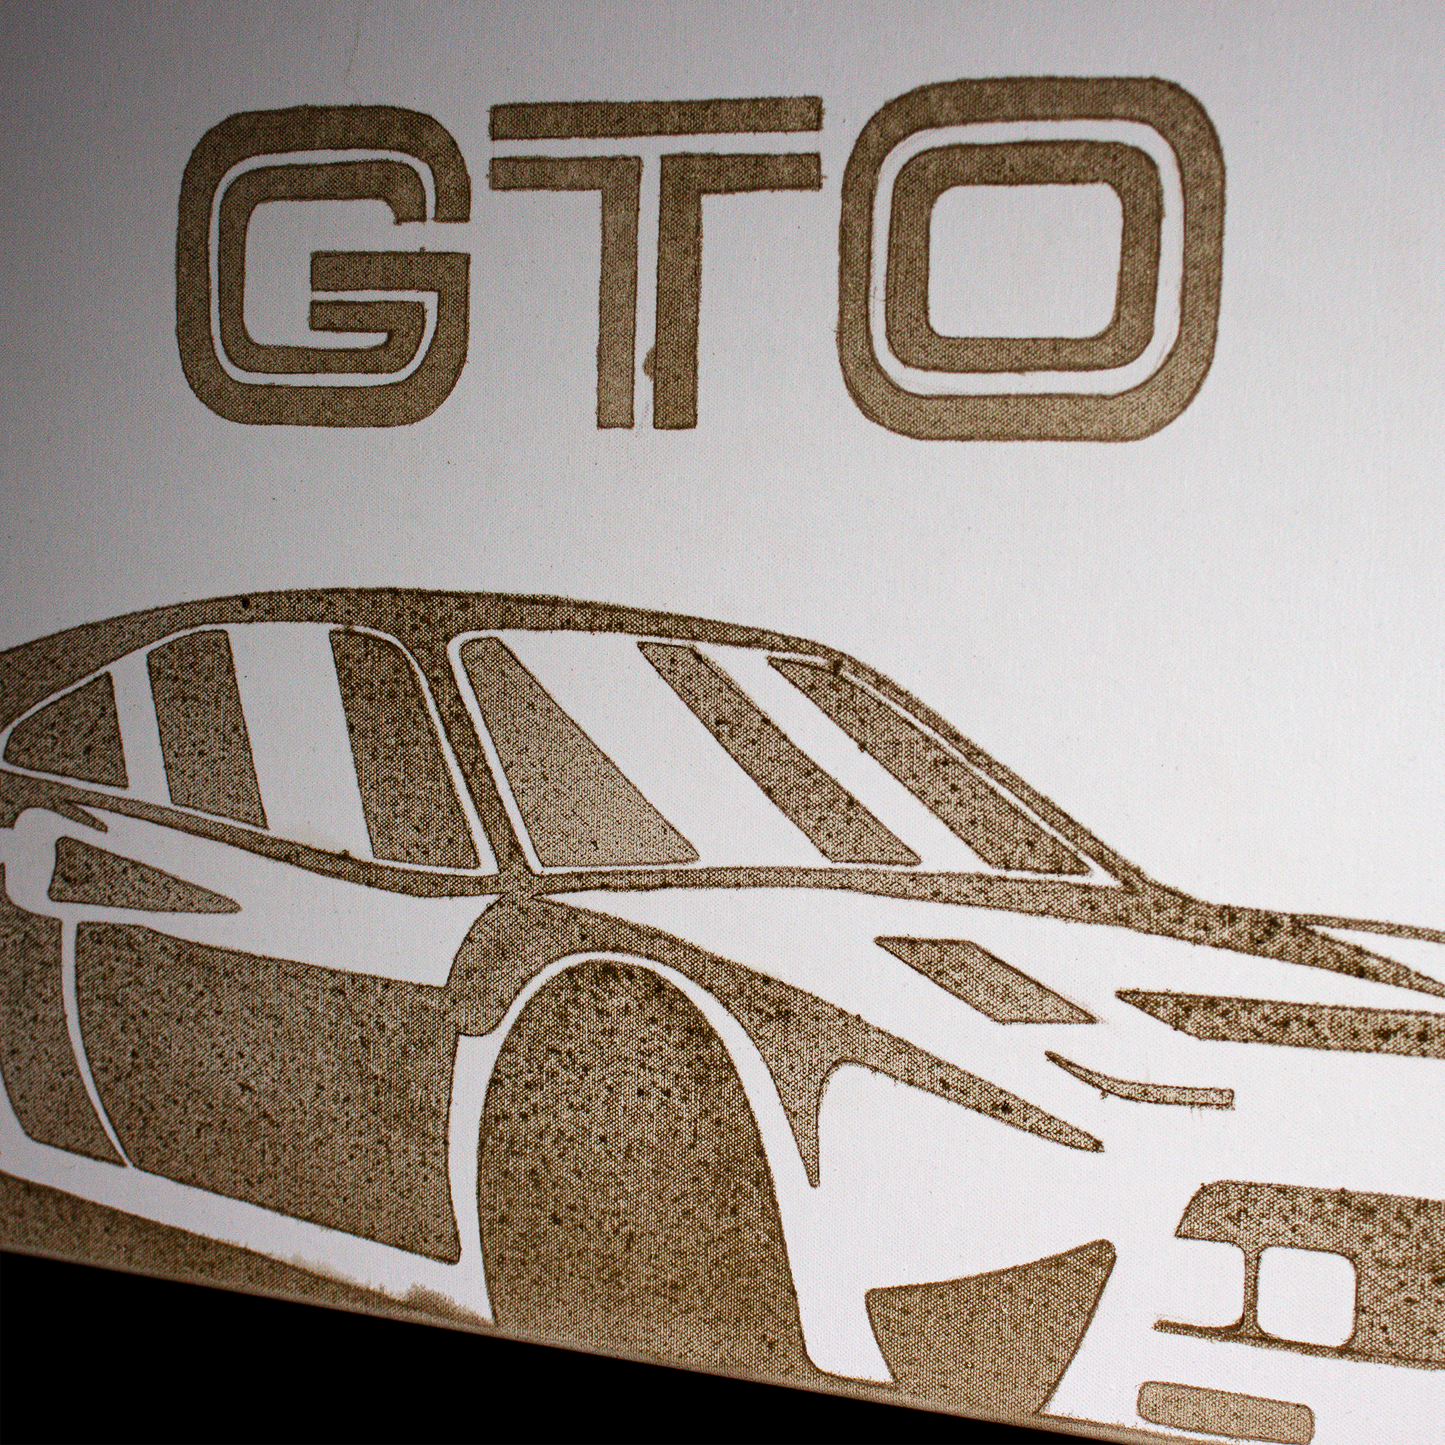 Engine Oil Painting - "GTO"